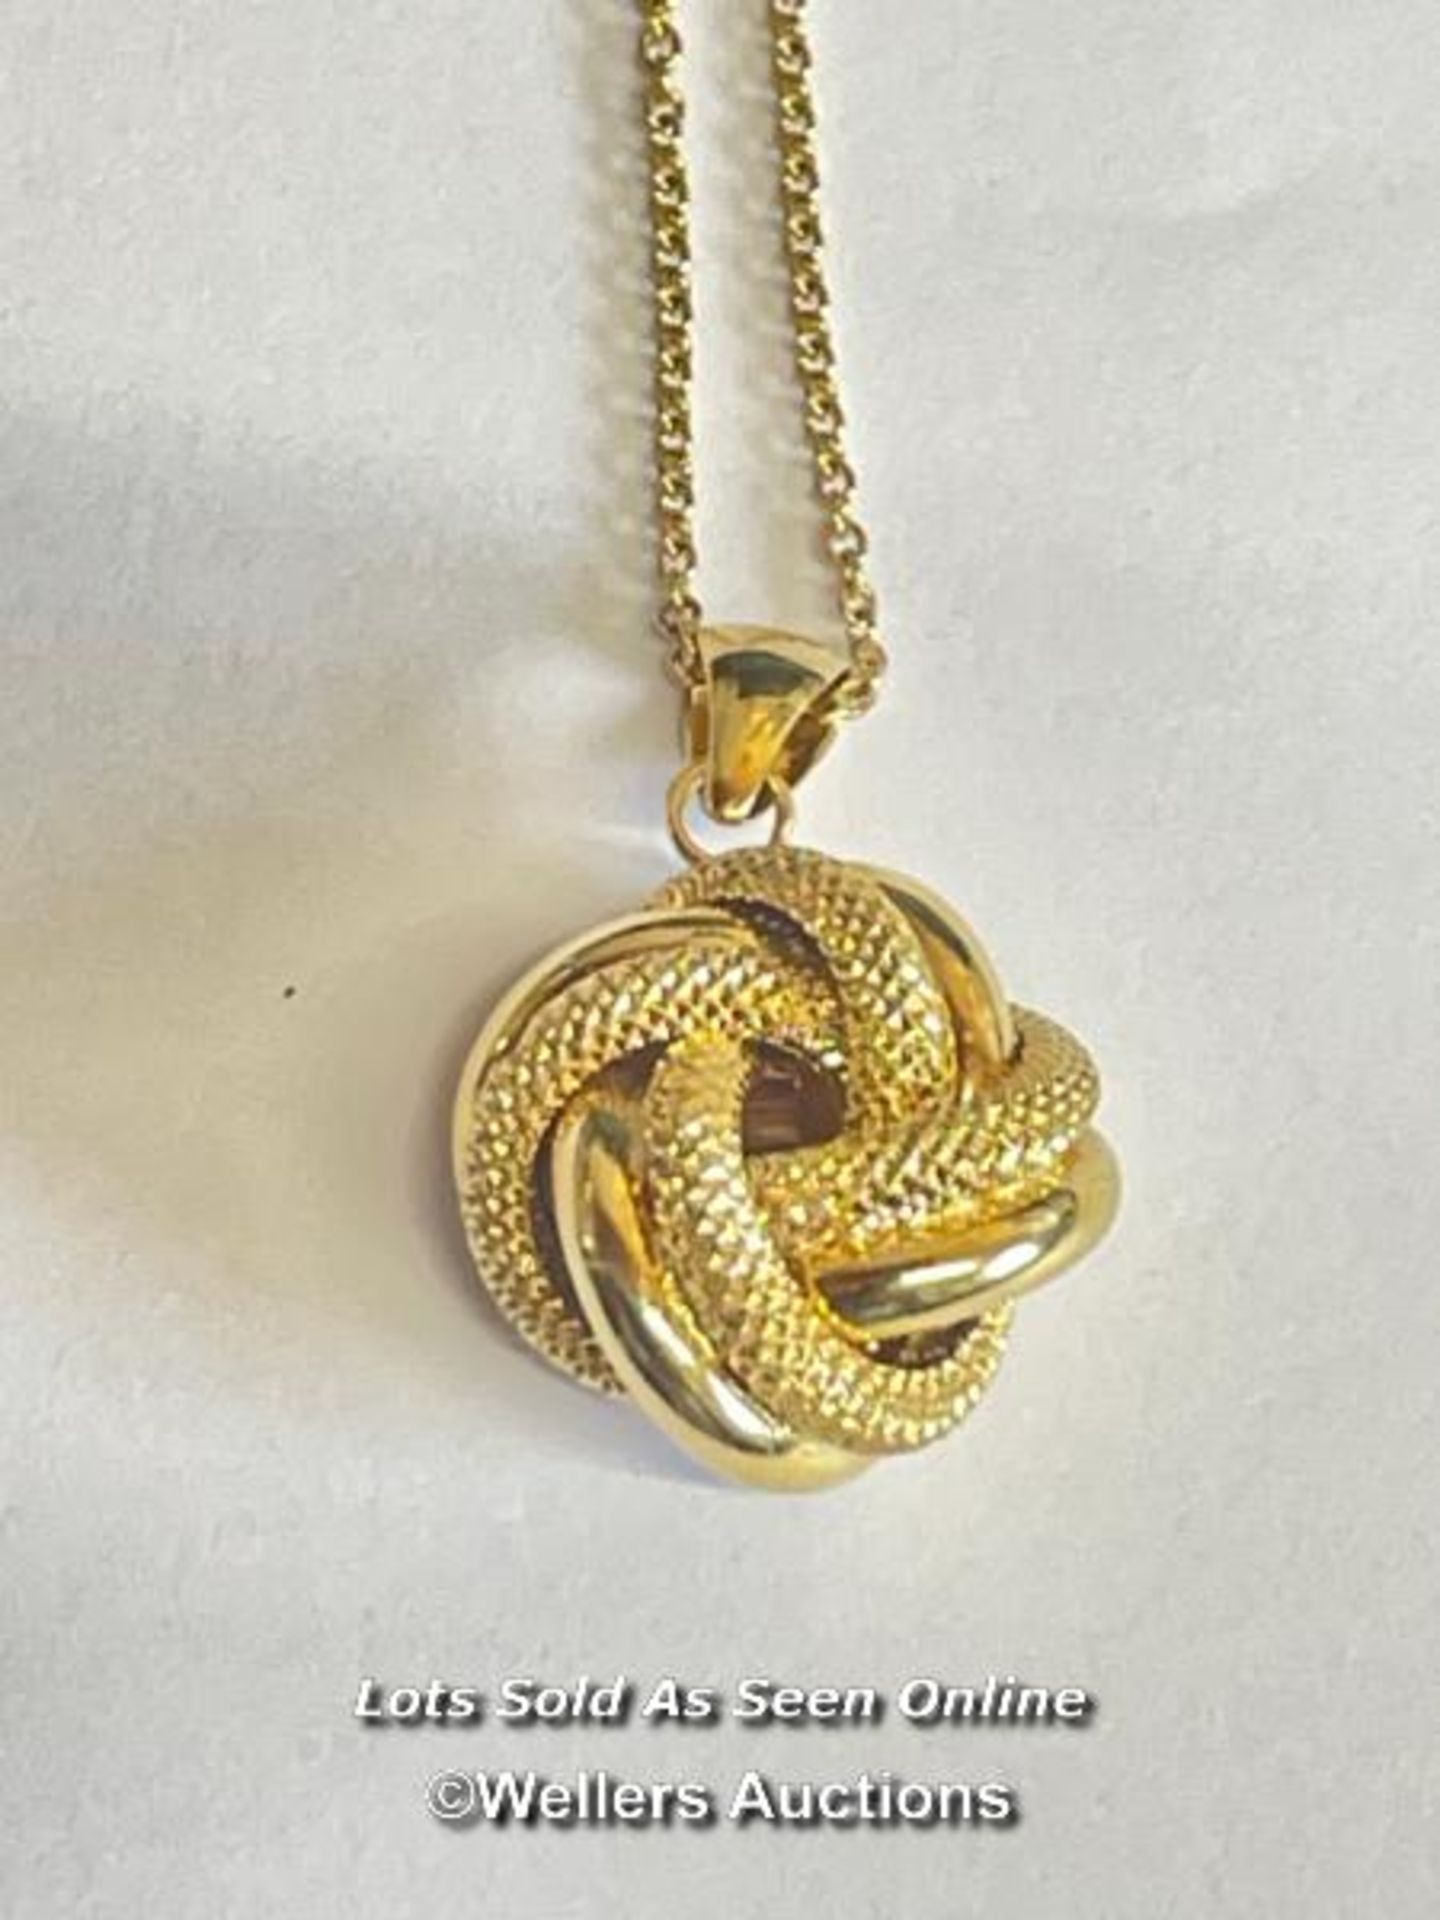 YELLOW GOLD LOVE KNOT PENDANT AND CHAIN STAMPED 14CT - Image 2 of 4